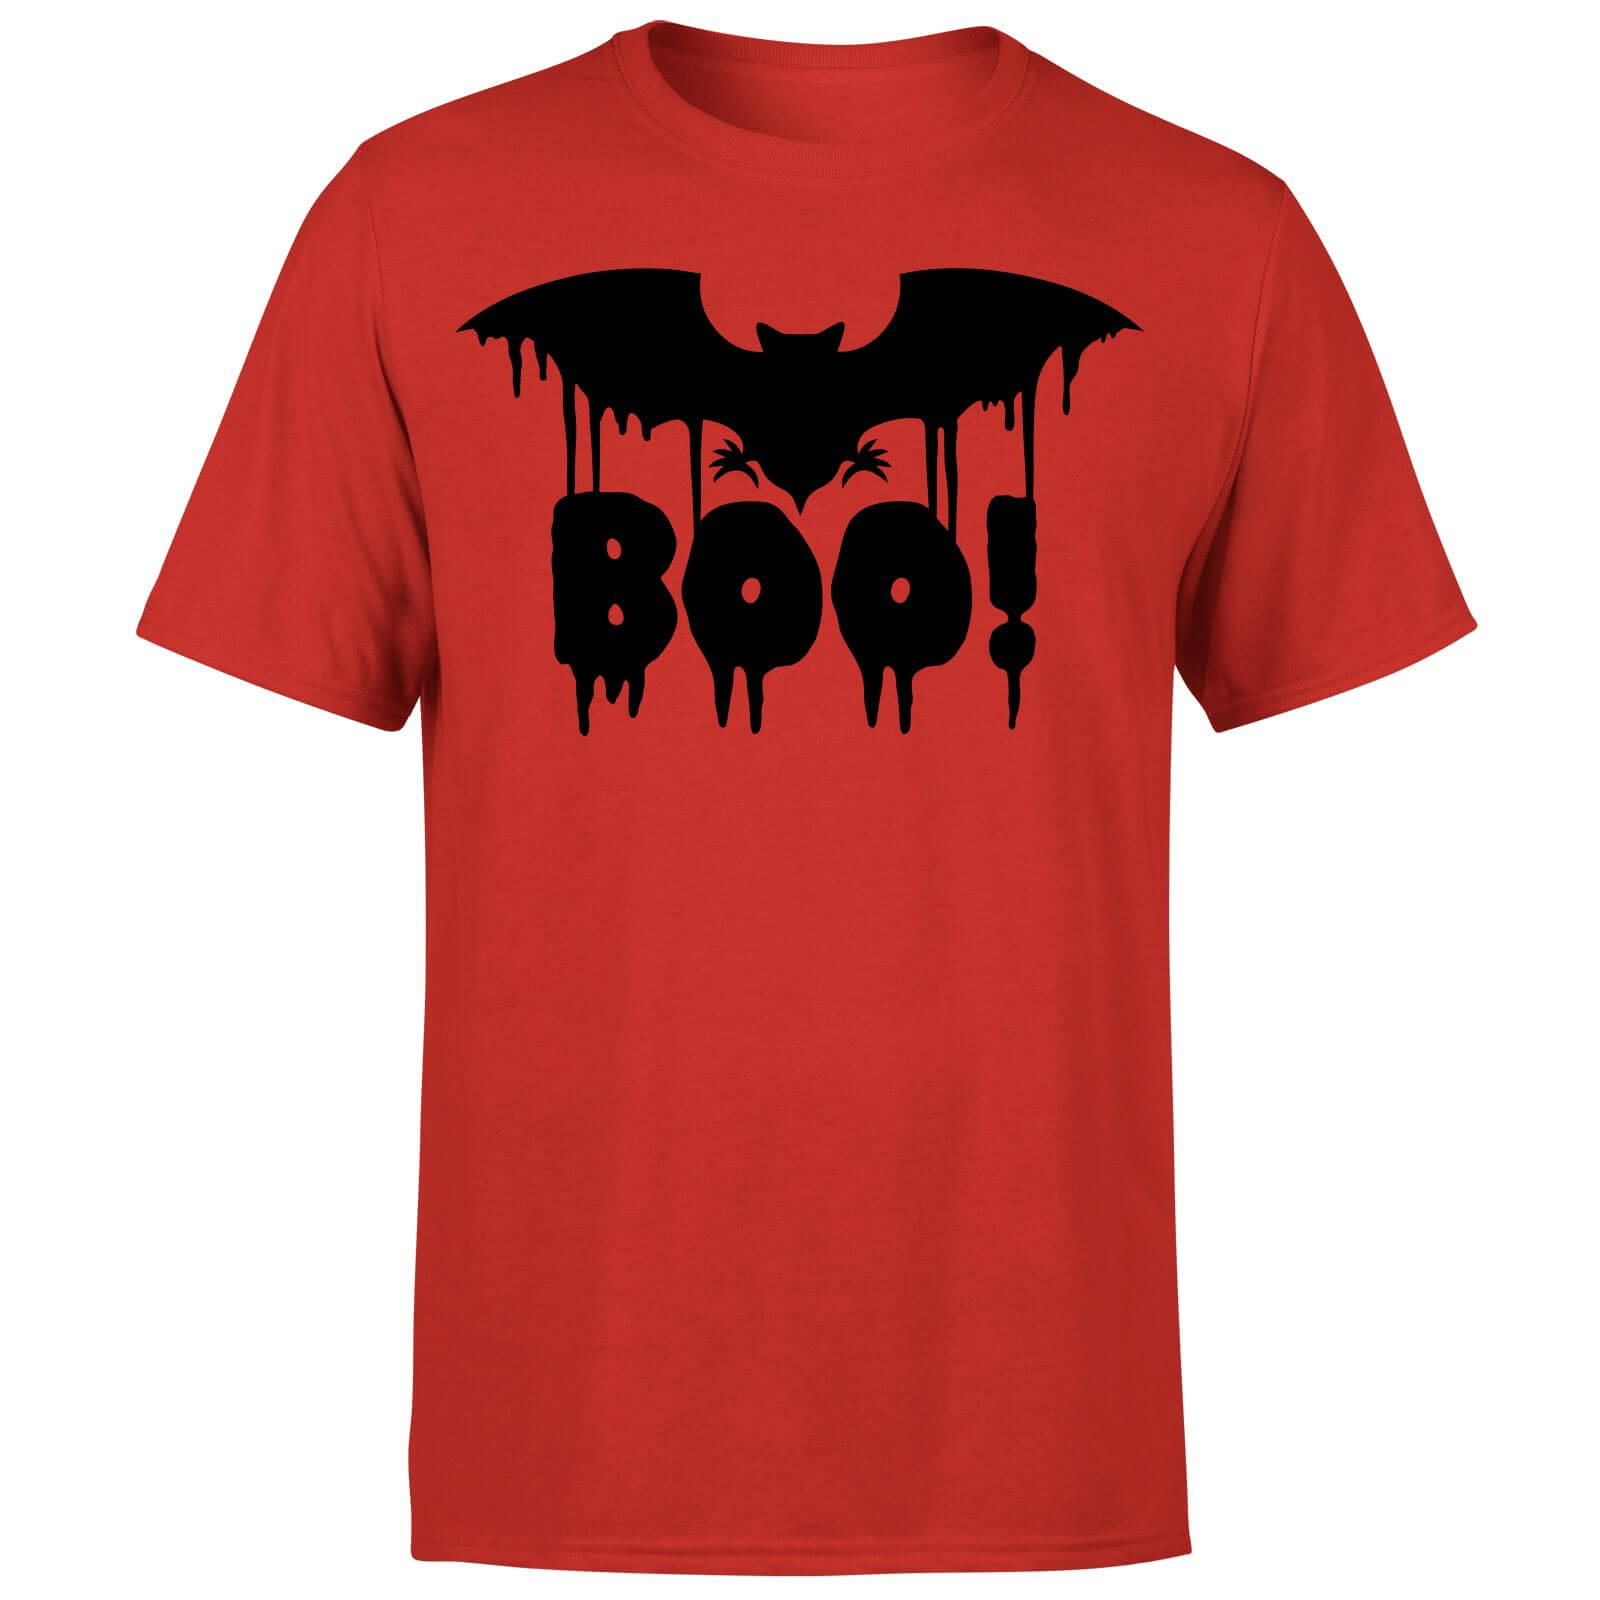 Boo Bat T-Shirt - Red - S - Red